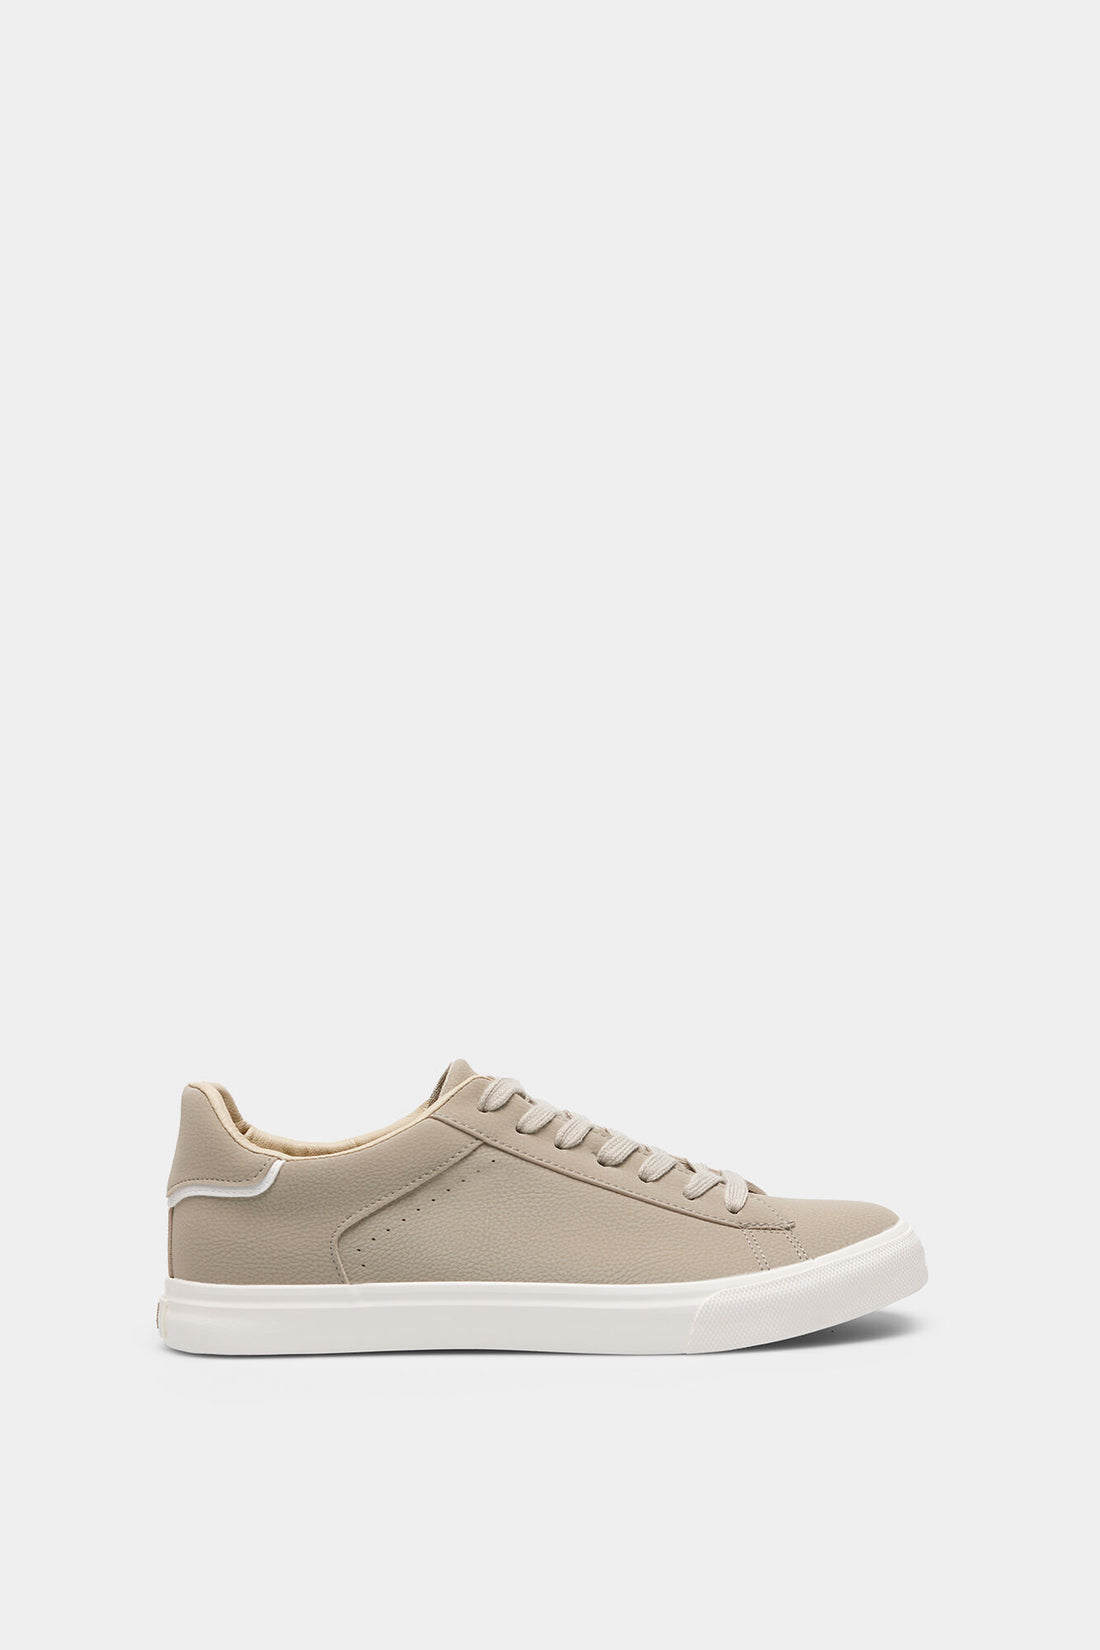 Beige Lace Up Trainers With White Sole_2997584_41_01